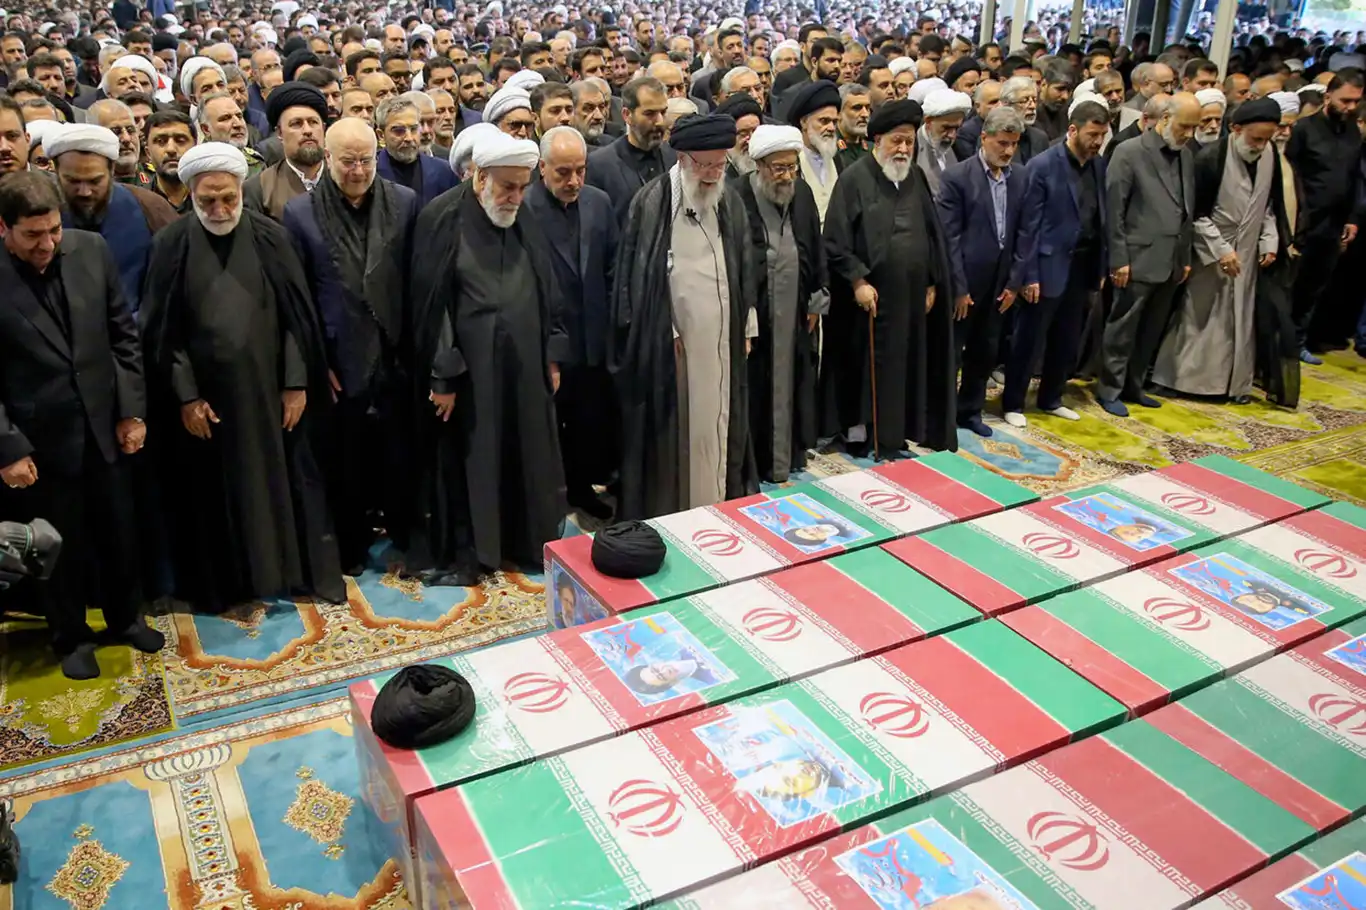 Supreme Leader leads funeral prayers for Iranian President Raisi  in Tehran